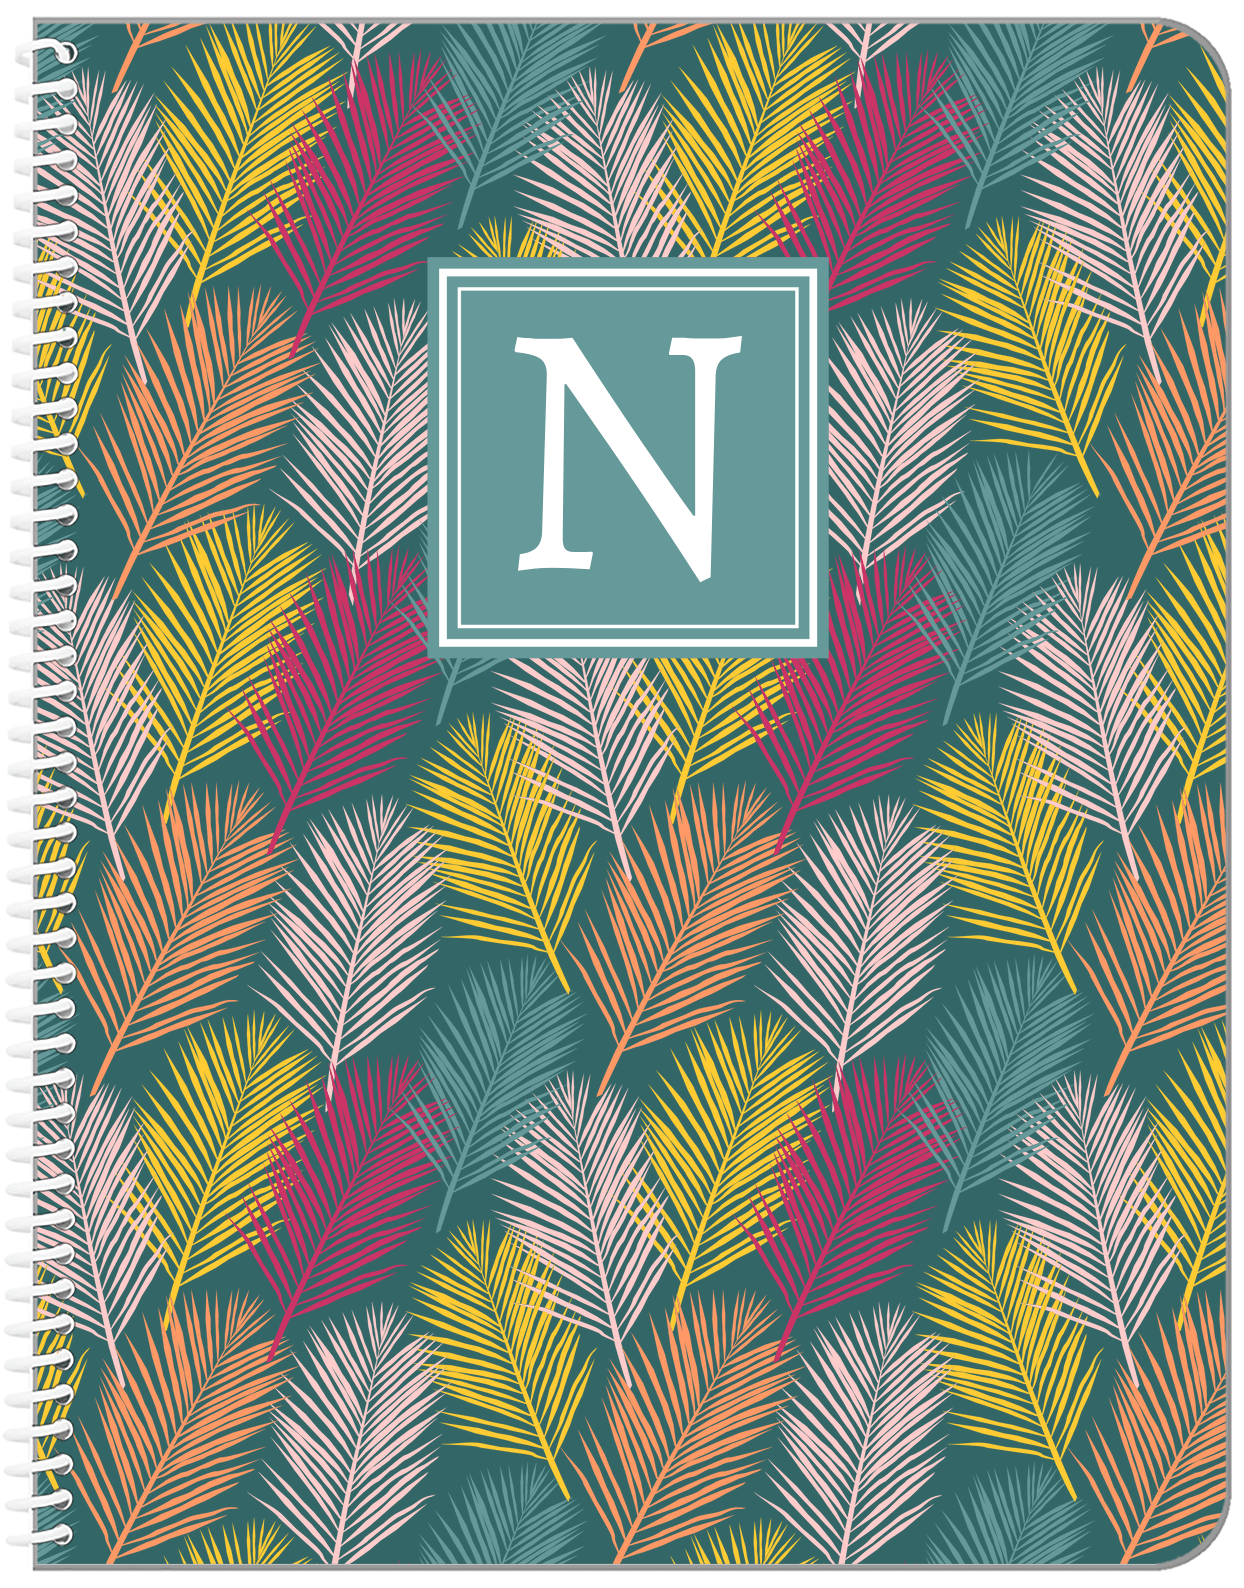 Personalized Palm Fronds Notebook - Teal Background - Front View